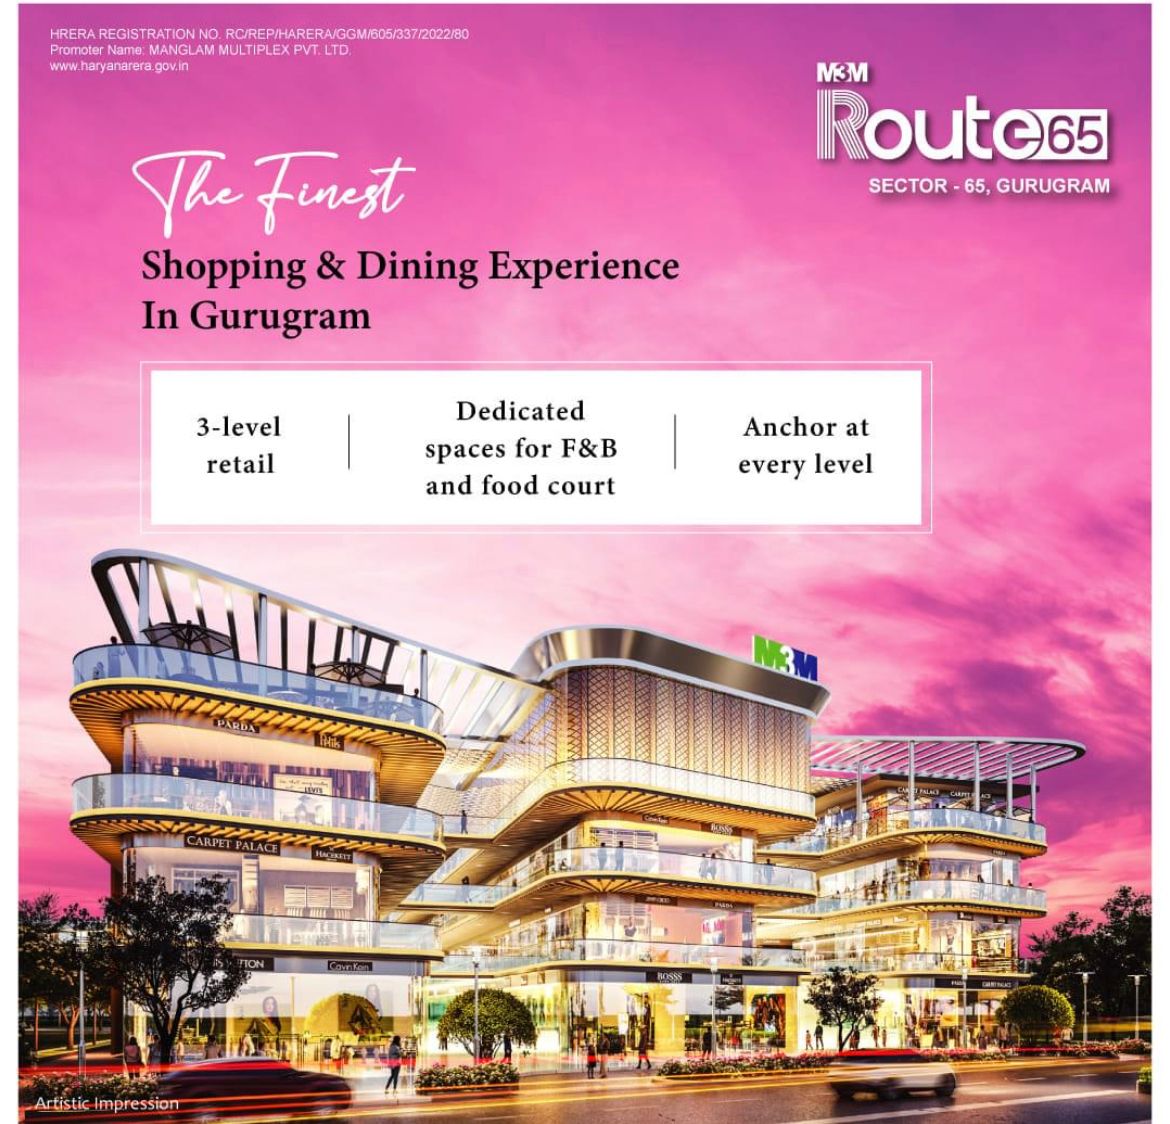 The finest shopping and dining experience at M3M Route 65, Gurgaon Update